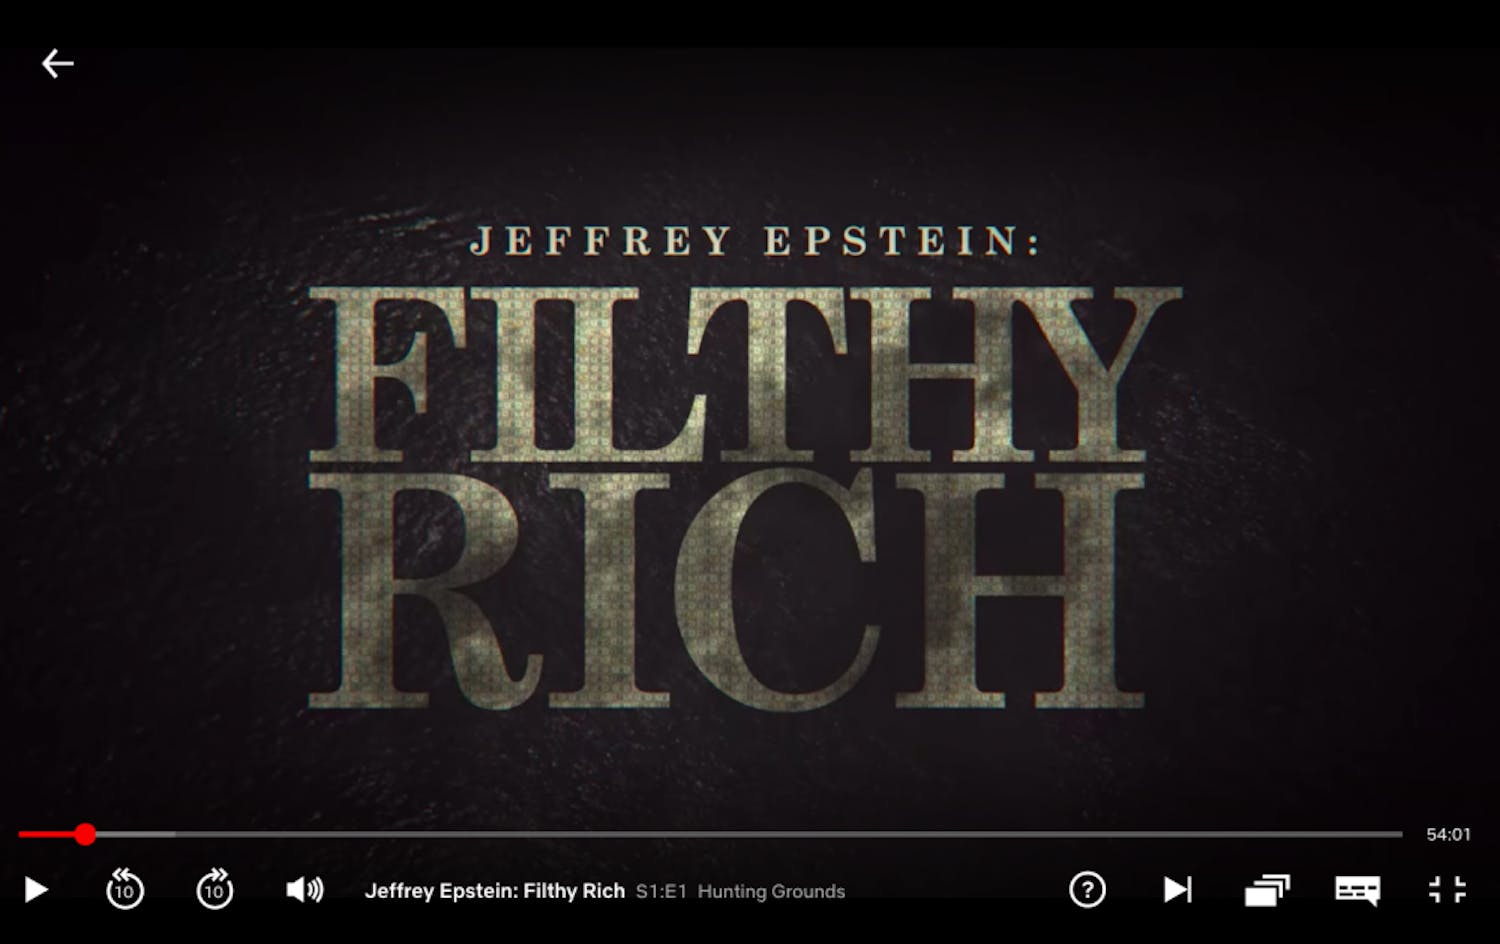 The new Netflix docuseries "Jeffery Epstein: Filthy Rich" was released on May 27. 